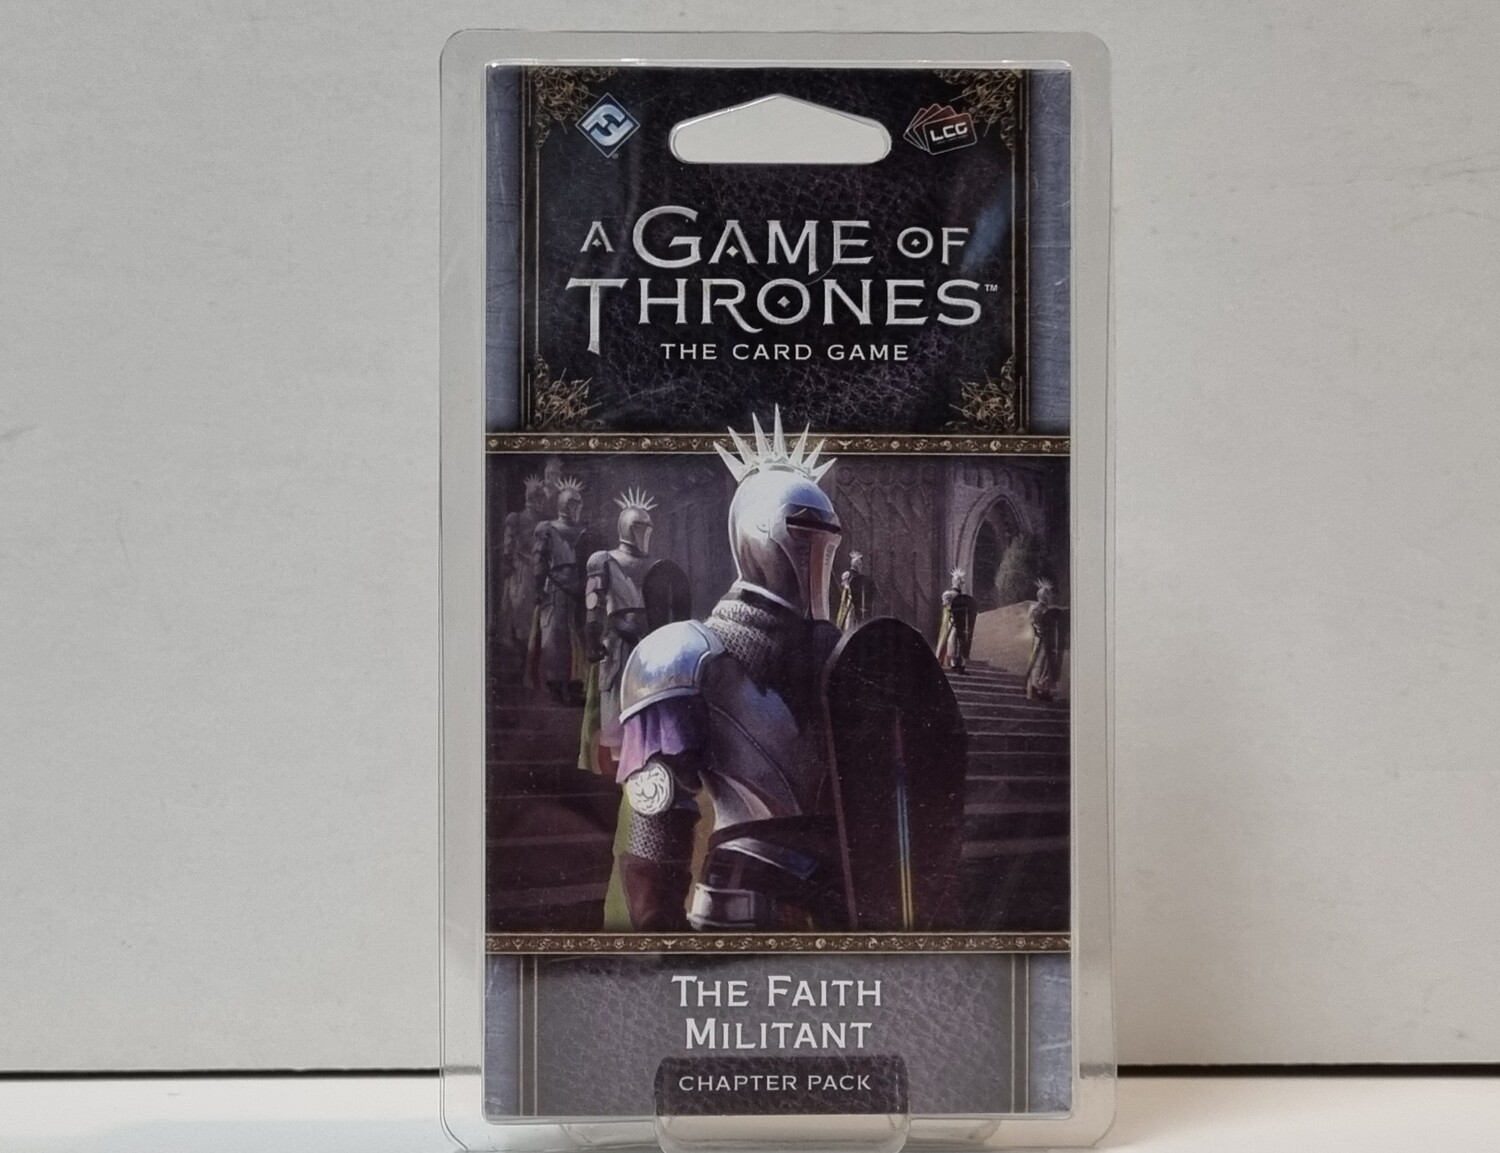 A Game of Thrones, Card Game, The Faith Militant, Chapter Pack